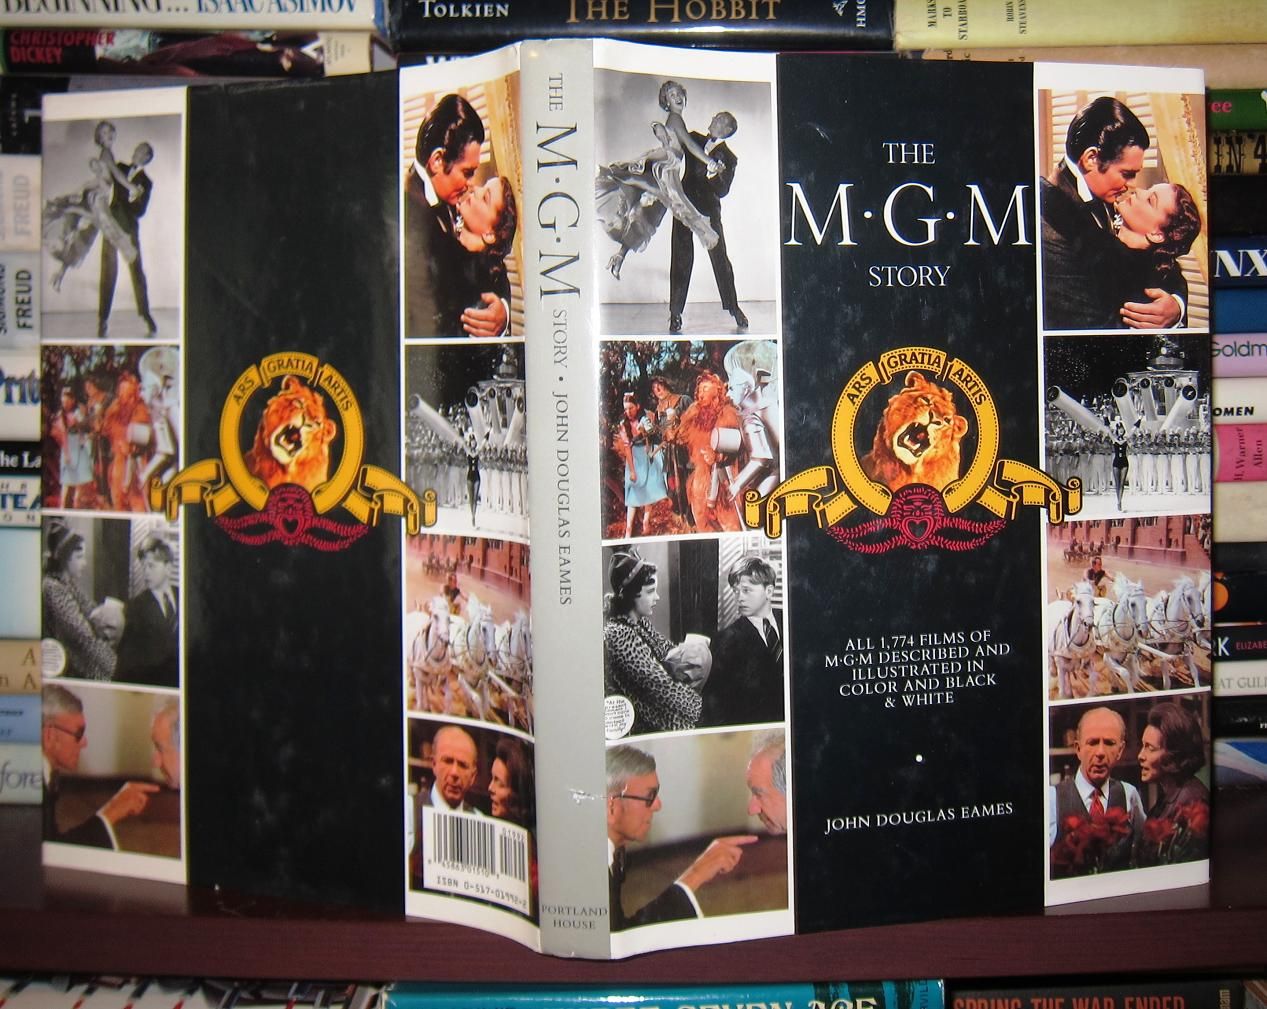 EARNES, JOHN DOUGLAS - The Mgm Story the Complete History of Sixty-Five Roaring Years